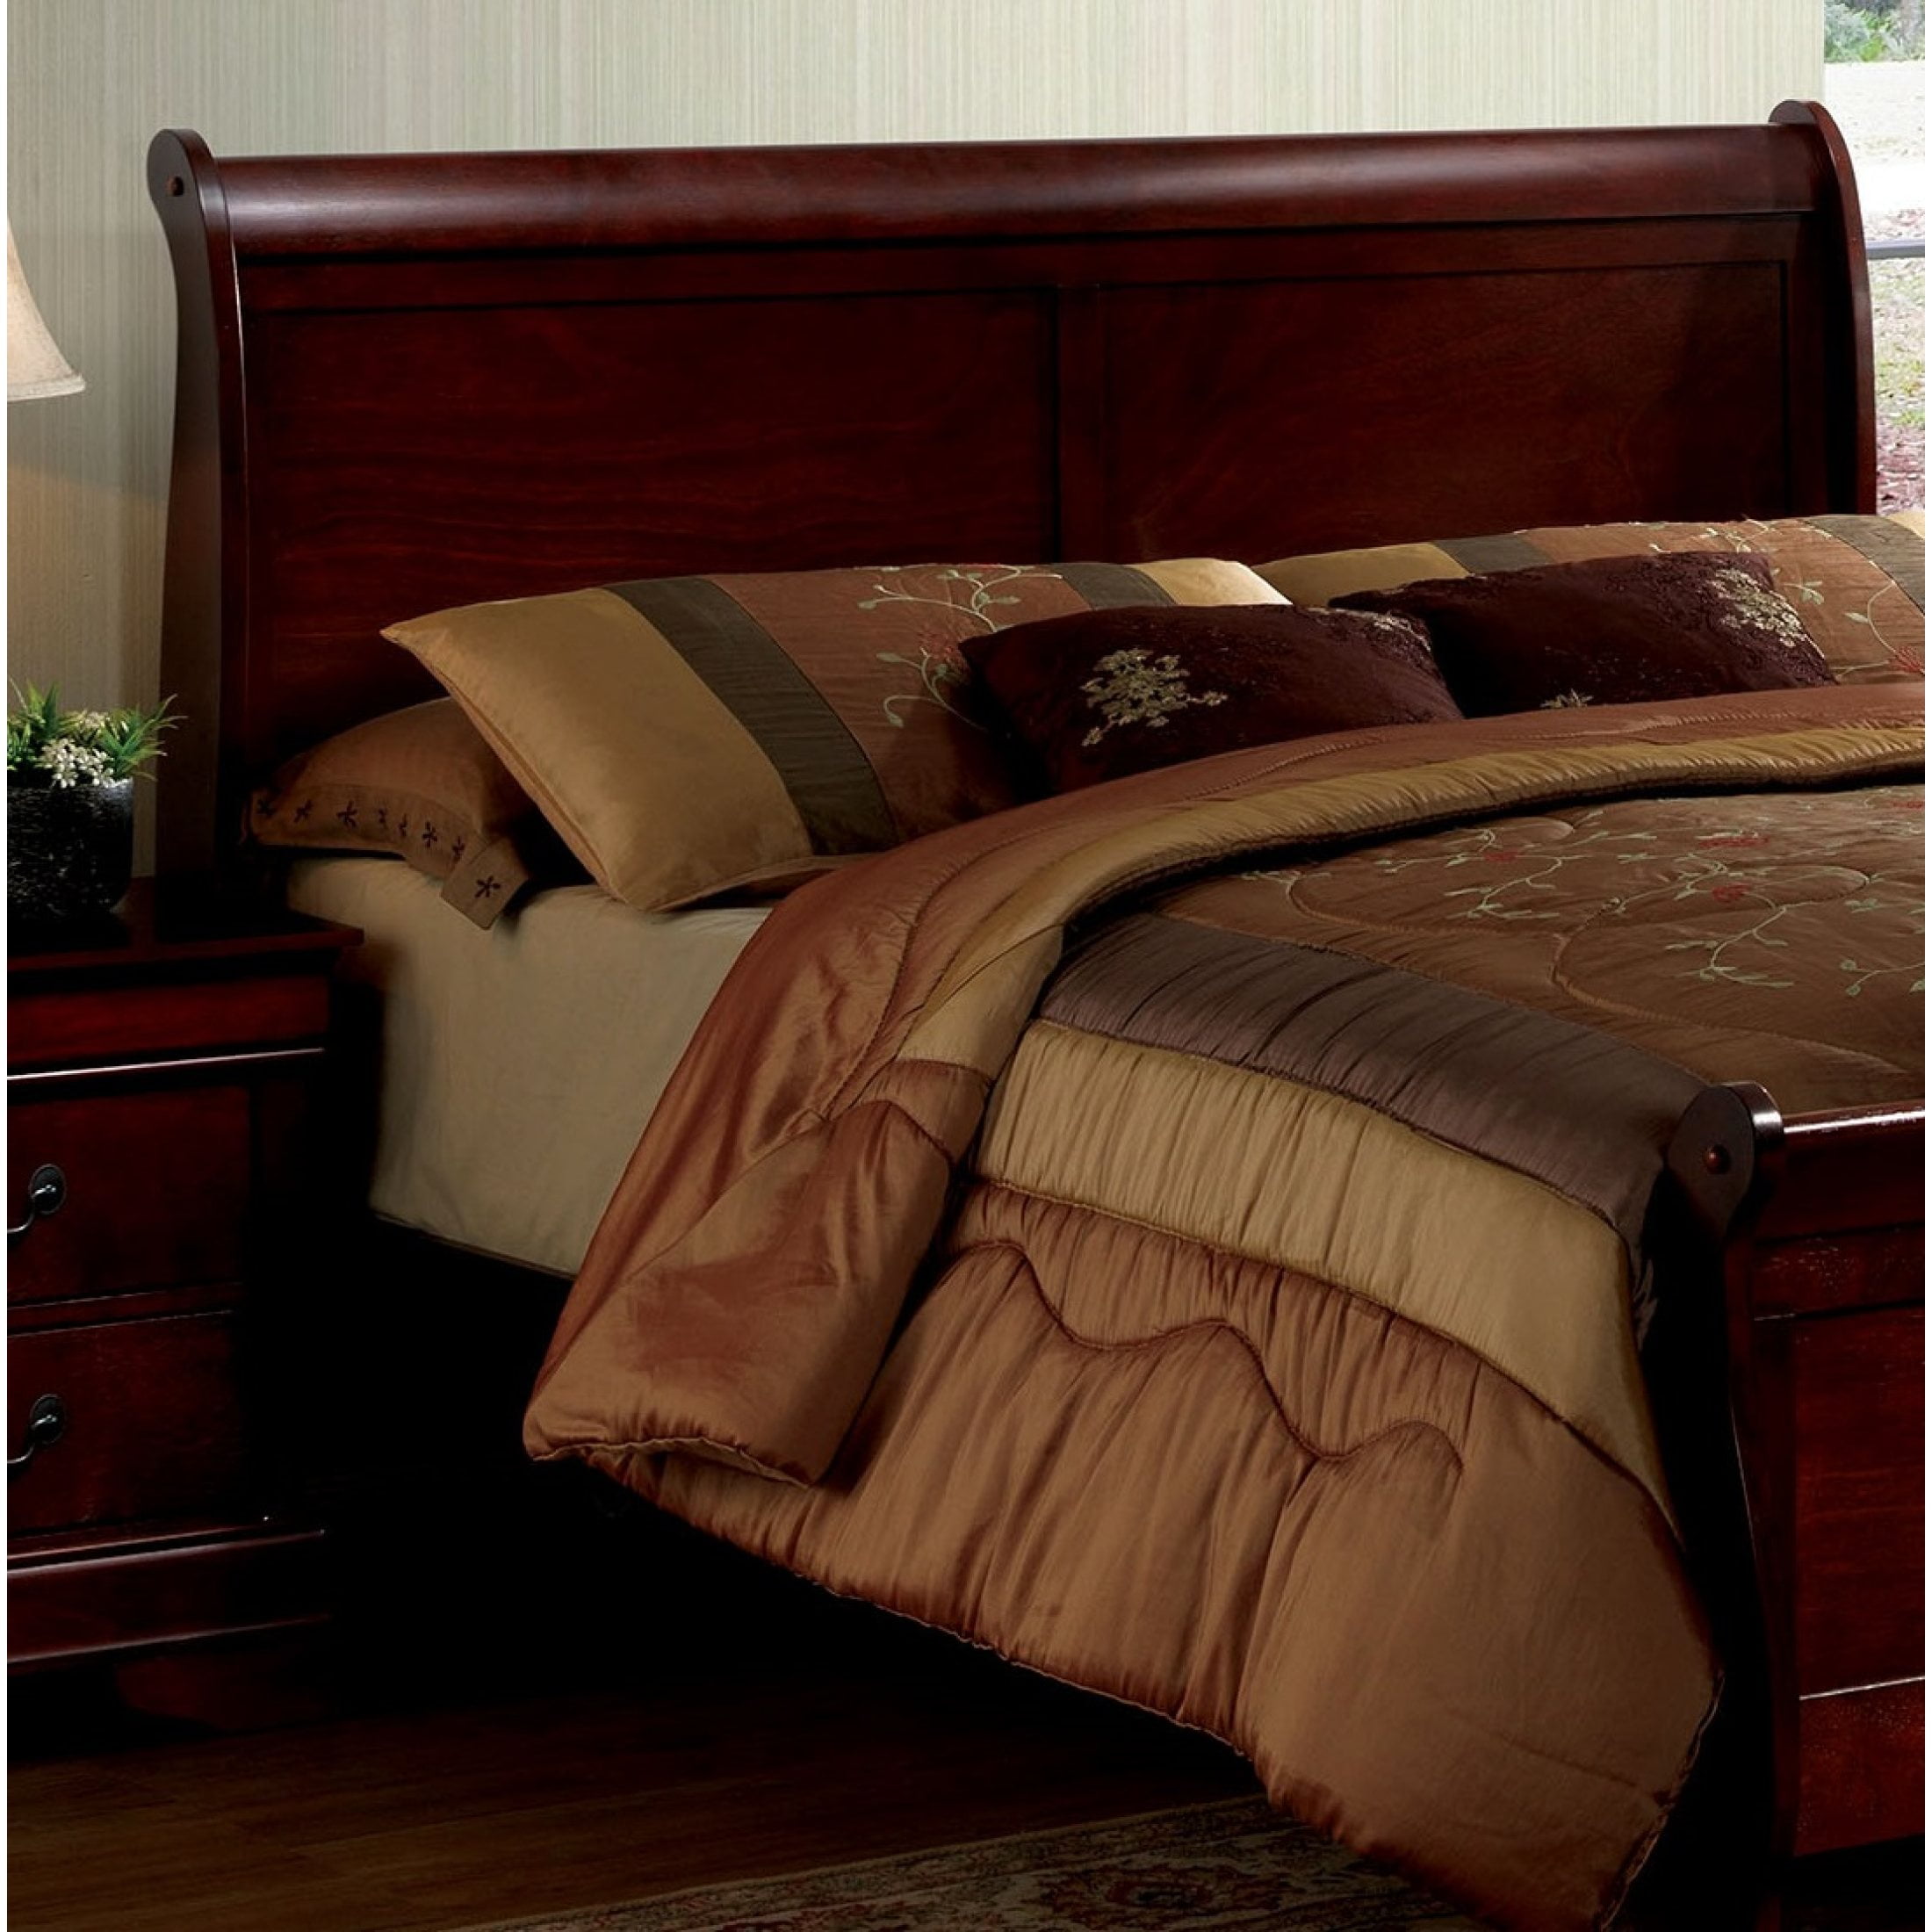 Louis Philippe III Cherry Wood Bed - On Sale - Bed Bath & Beyond - 12314381